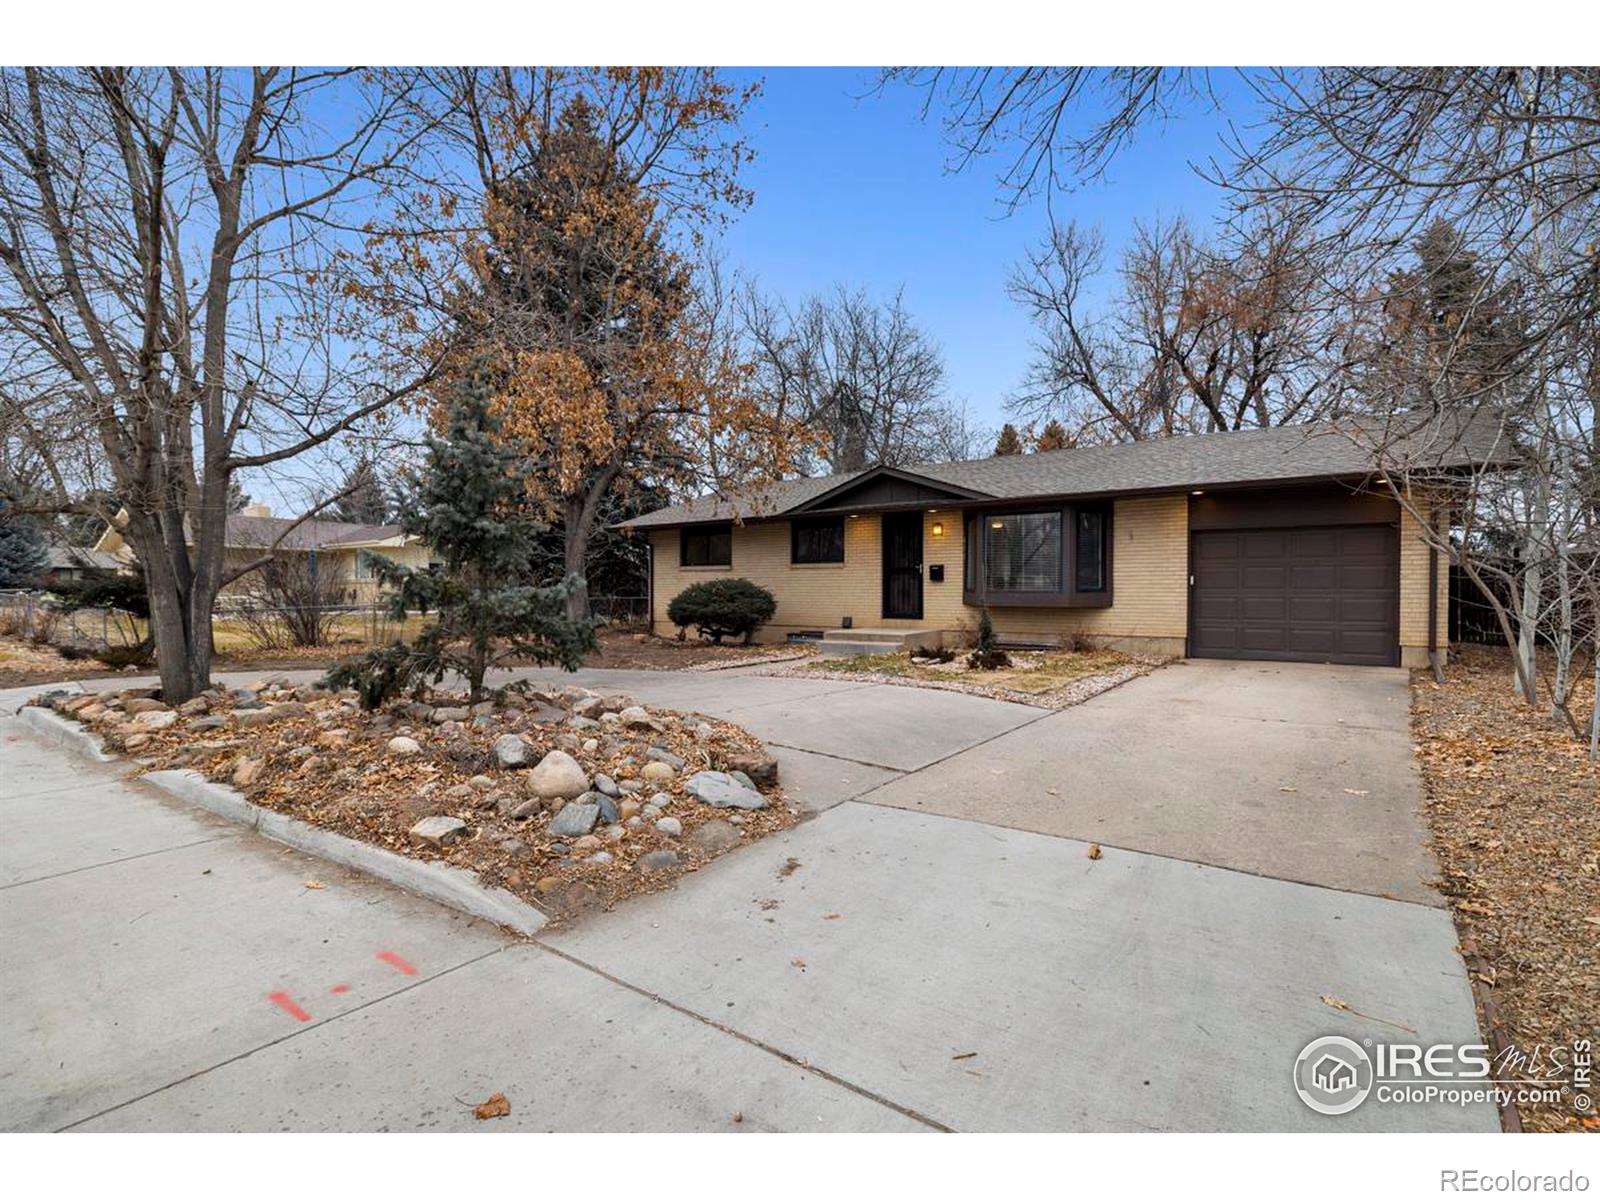 404 e drake road, fort collins sold home. Closed on 2024-04-08 for $535,000.